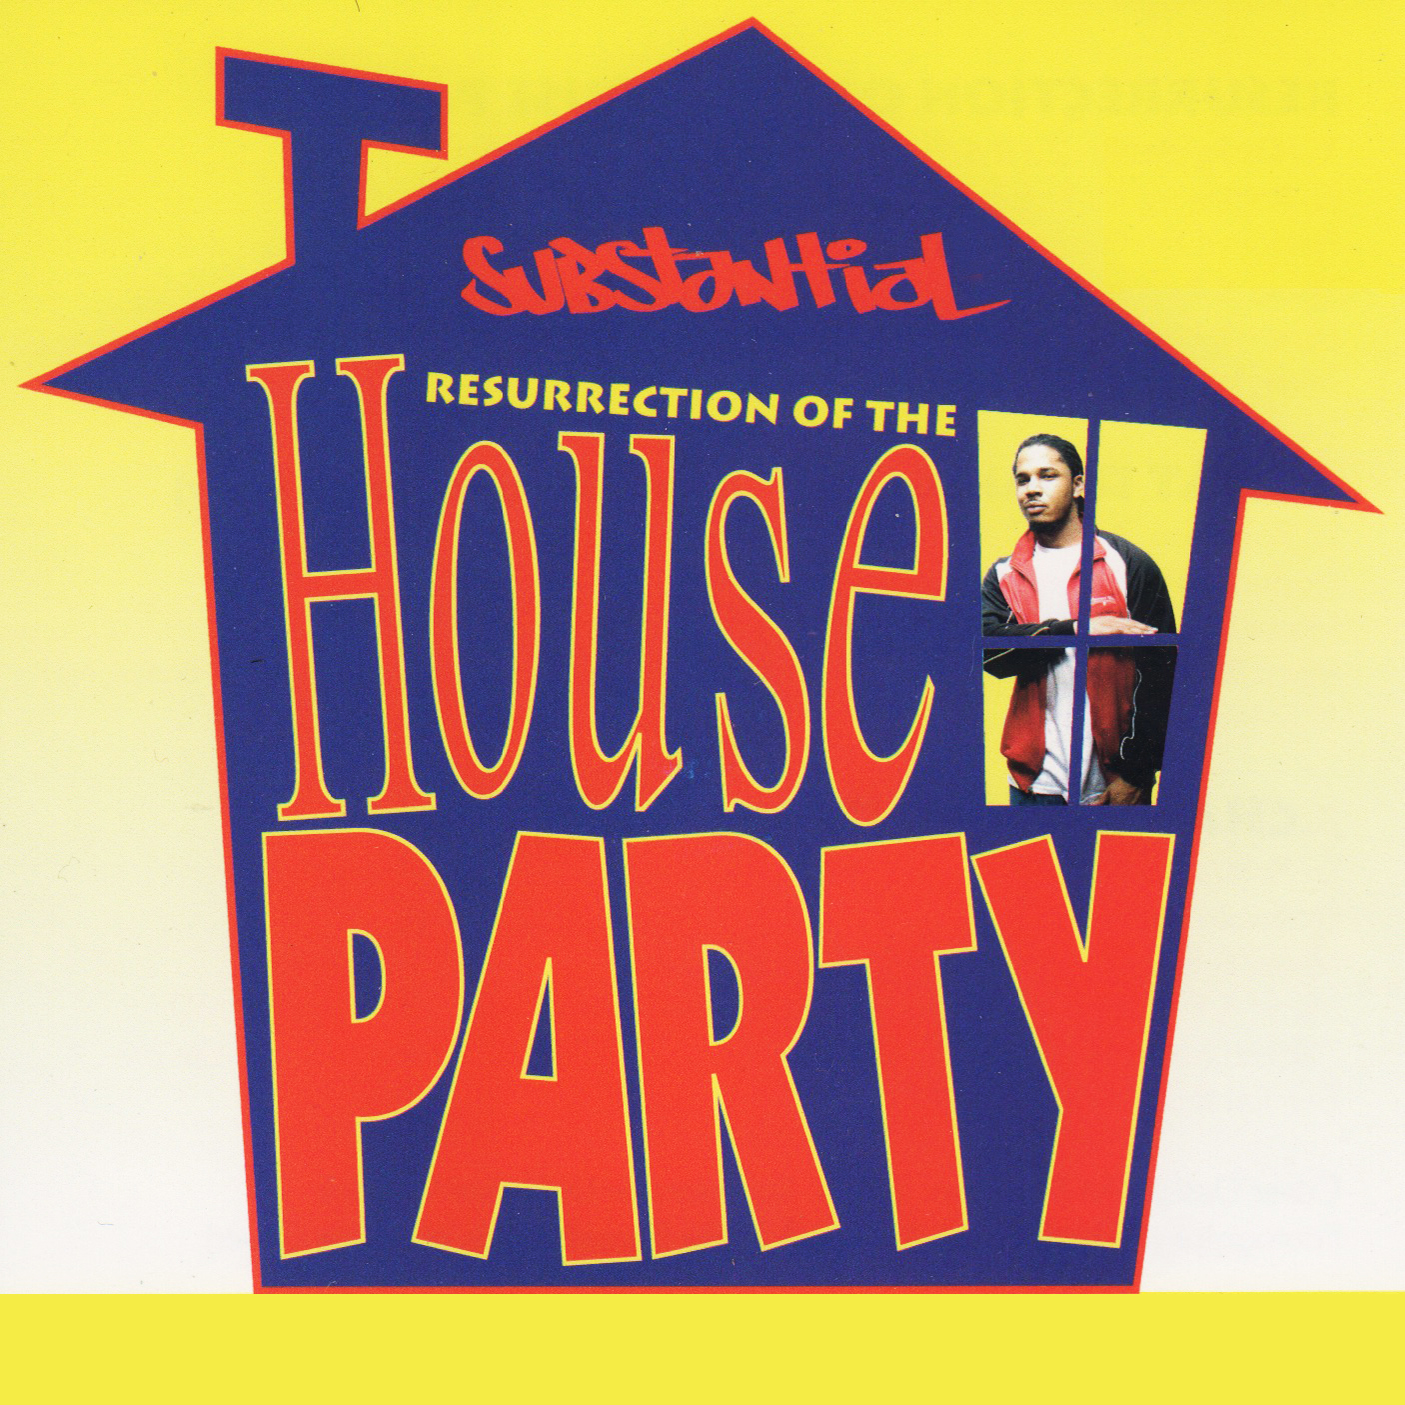 Resurrection of the House Party (Edited)